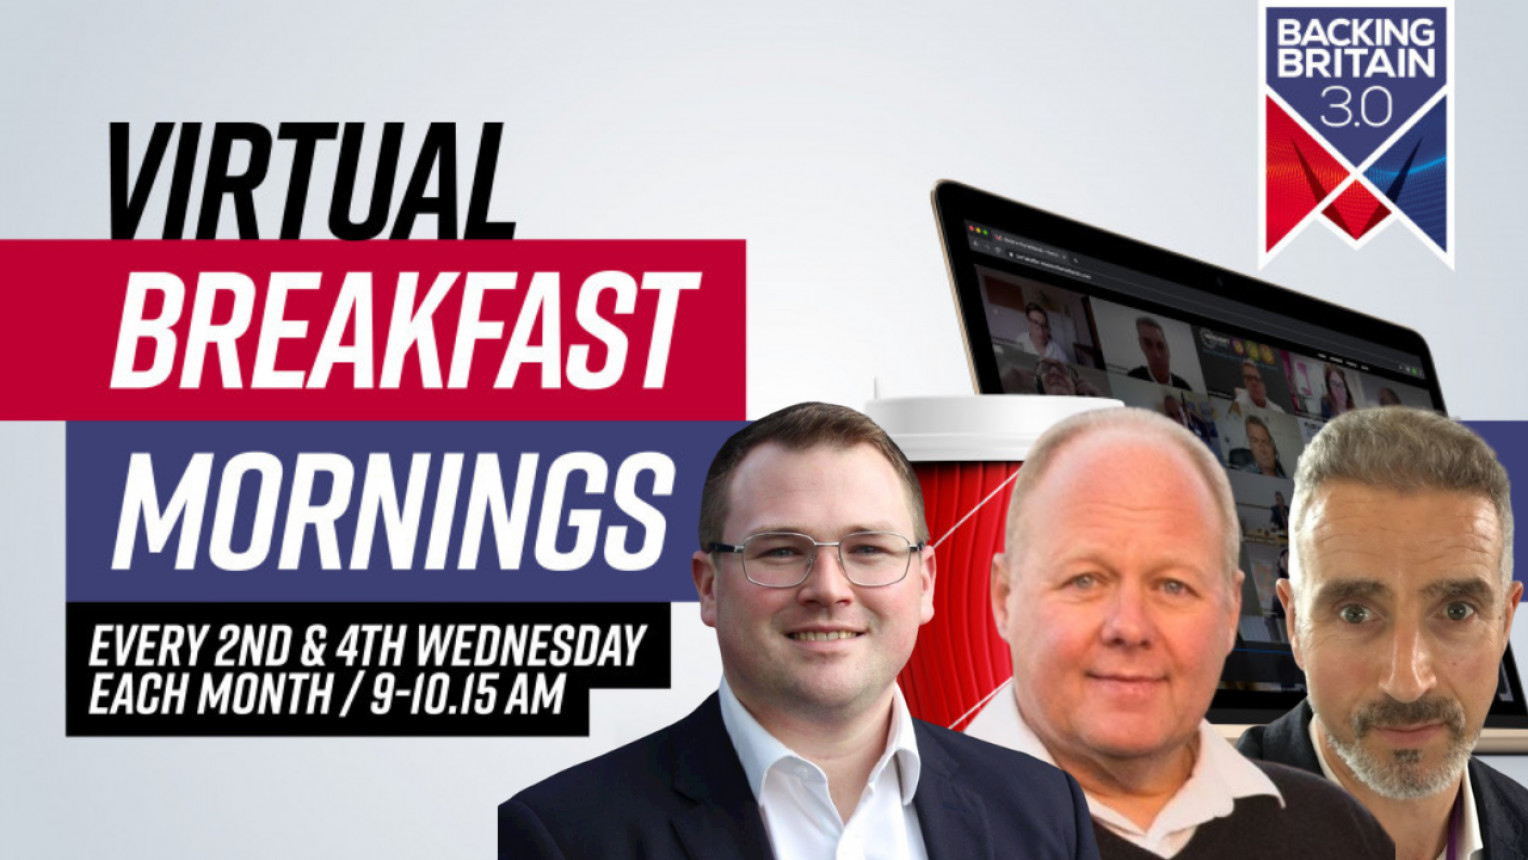 Backing Britain Virtual Breakfast Morning with Control Energy Costs, Hexagon and Assemtron